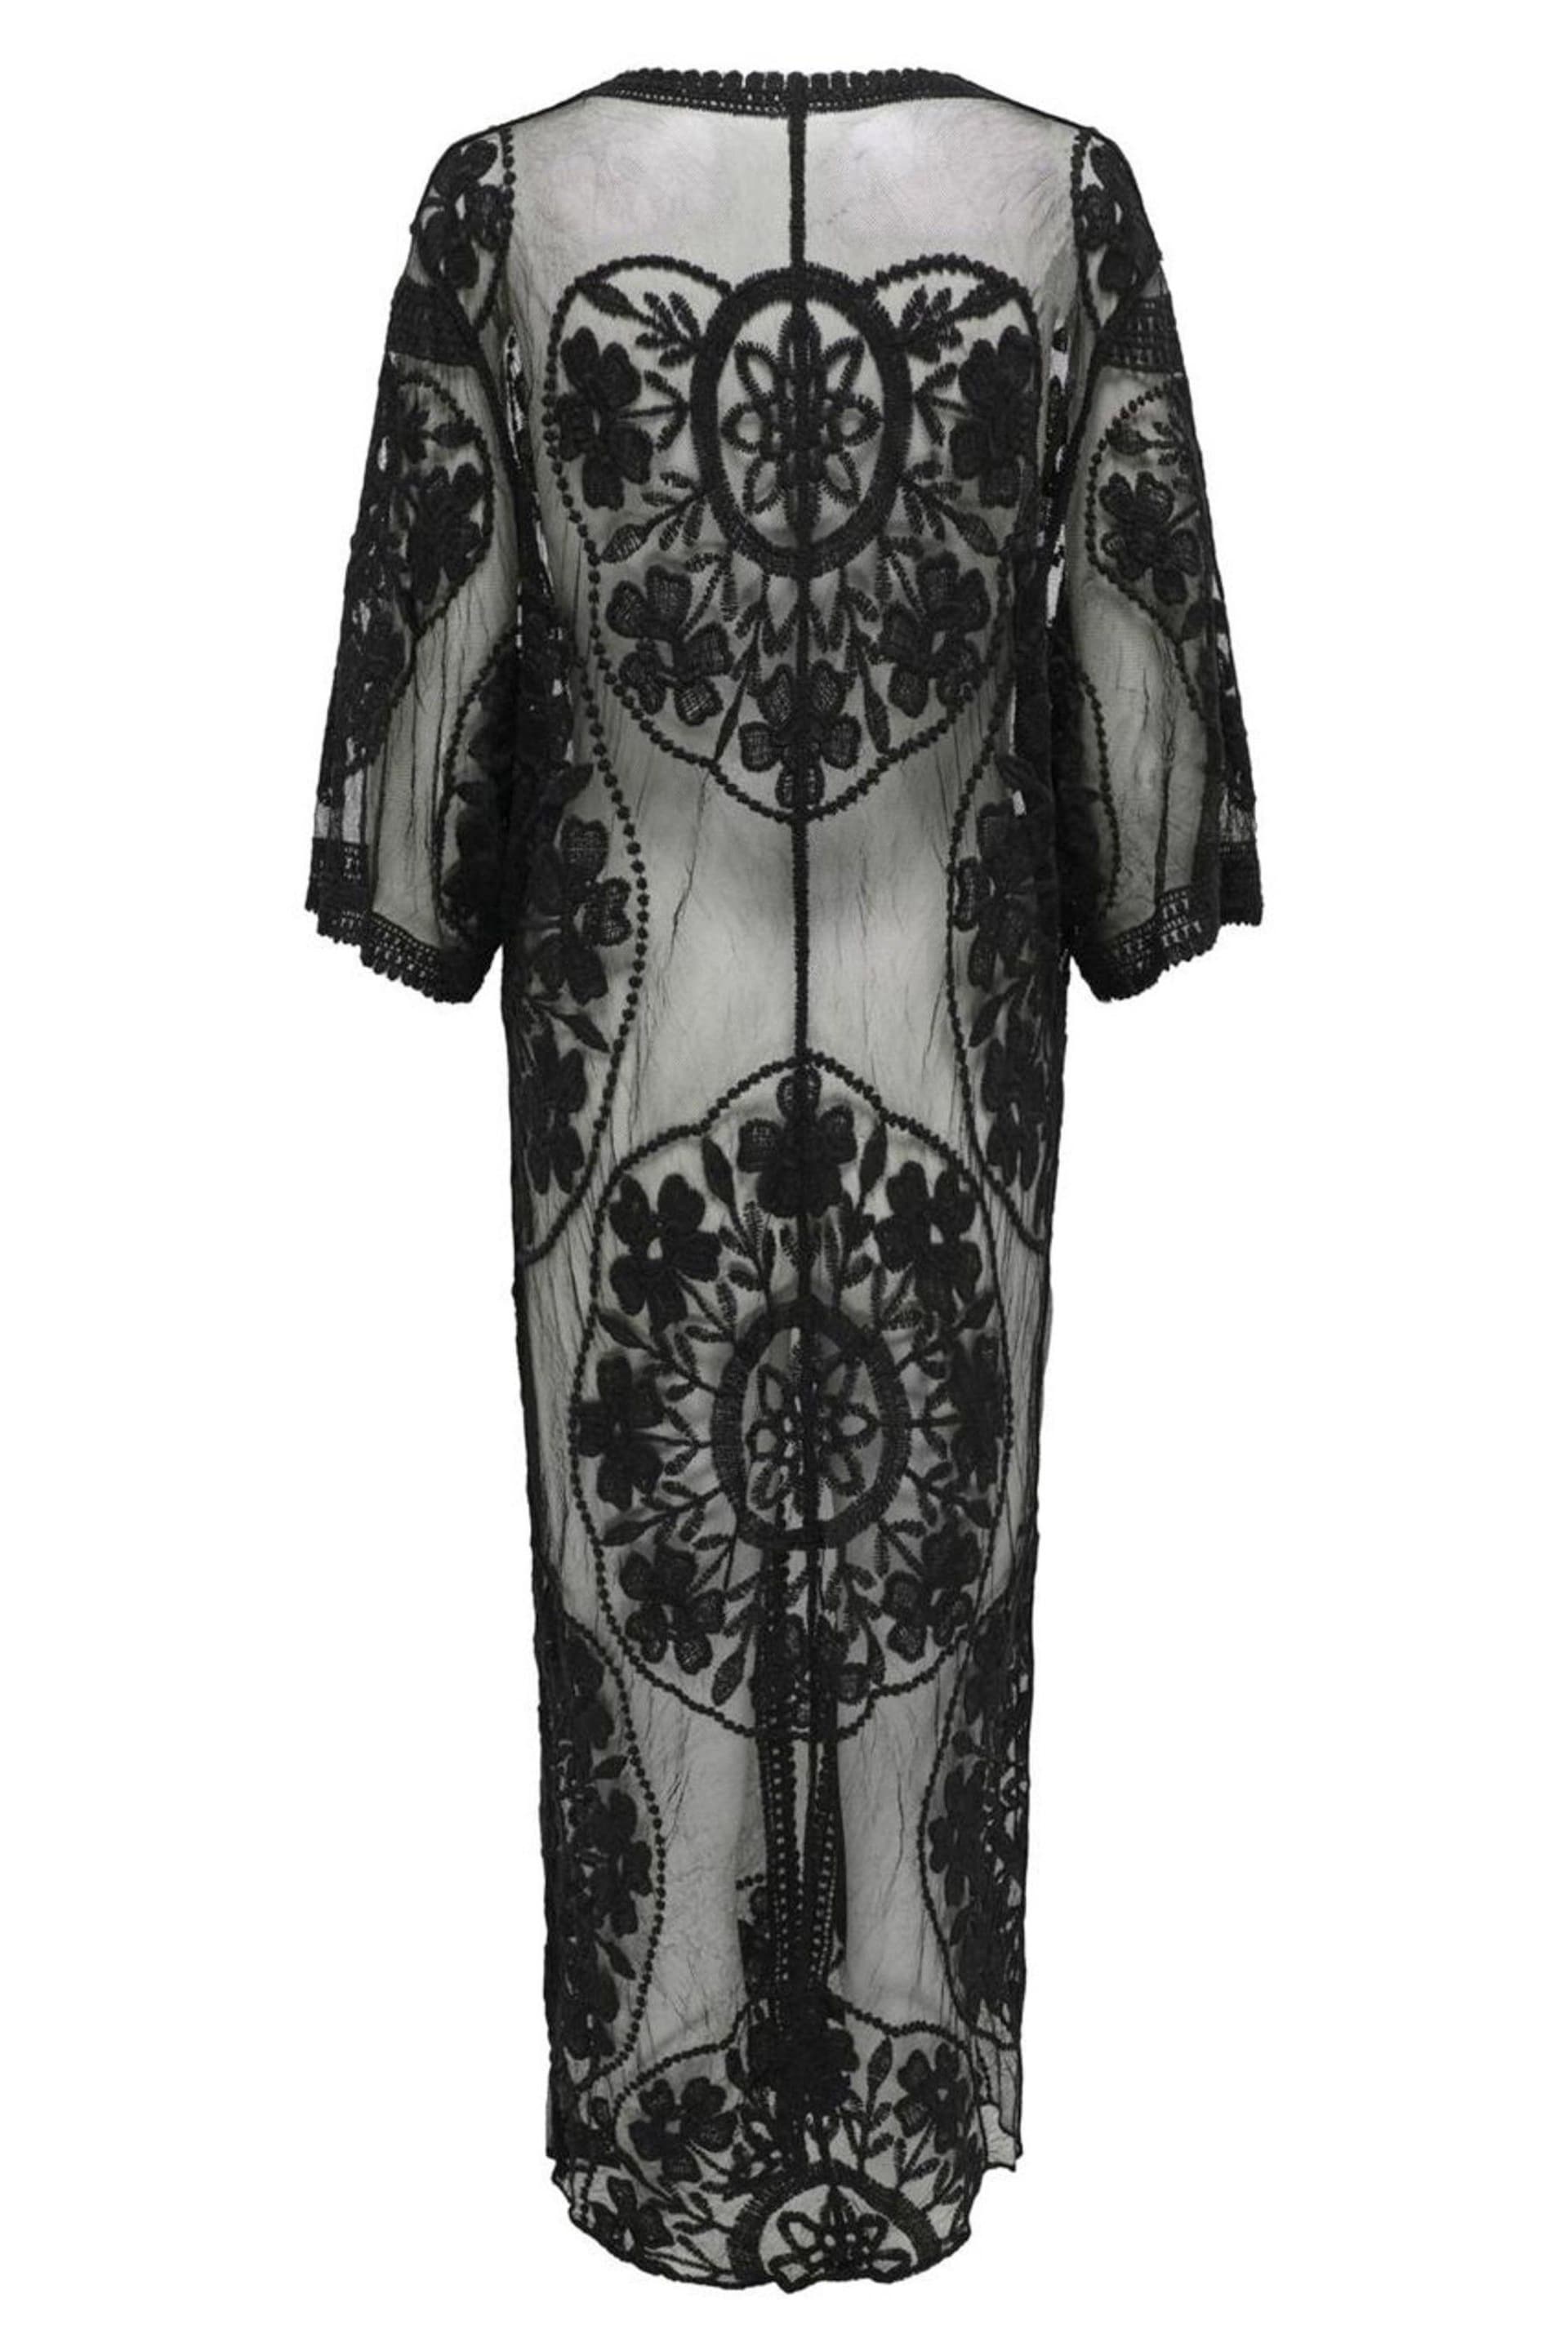 ONLY Black Embroidered Maxi Beach Cover-Up Kaftan - Image 7 of 7